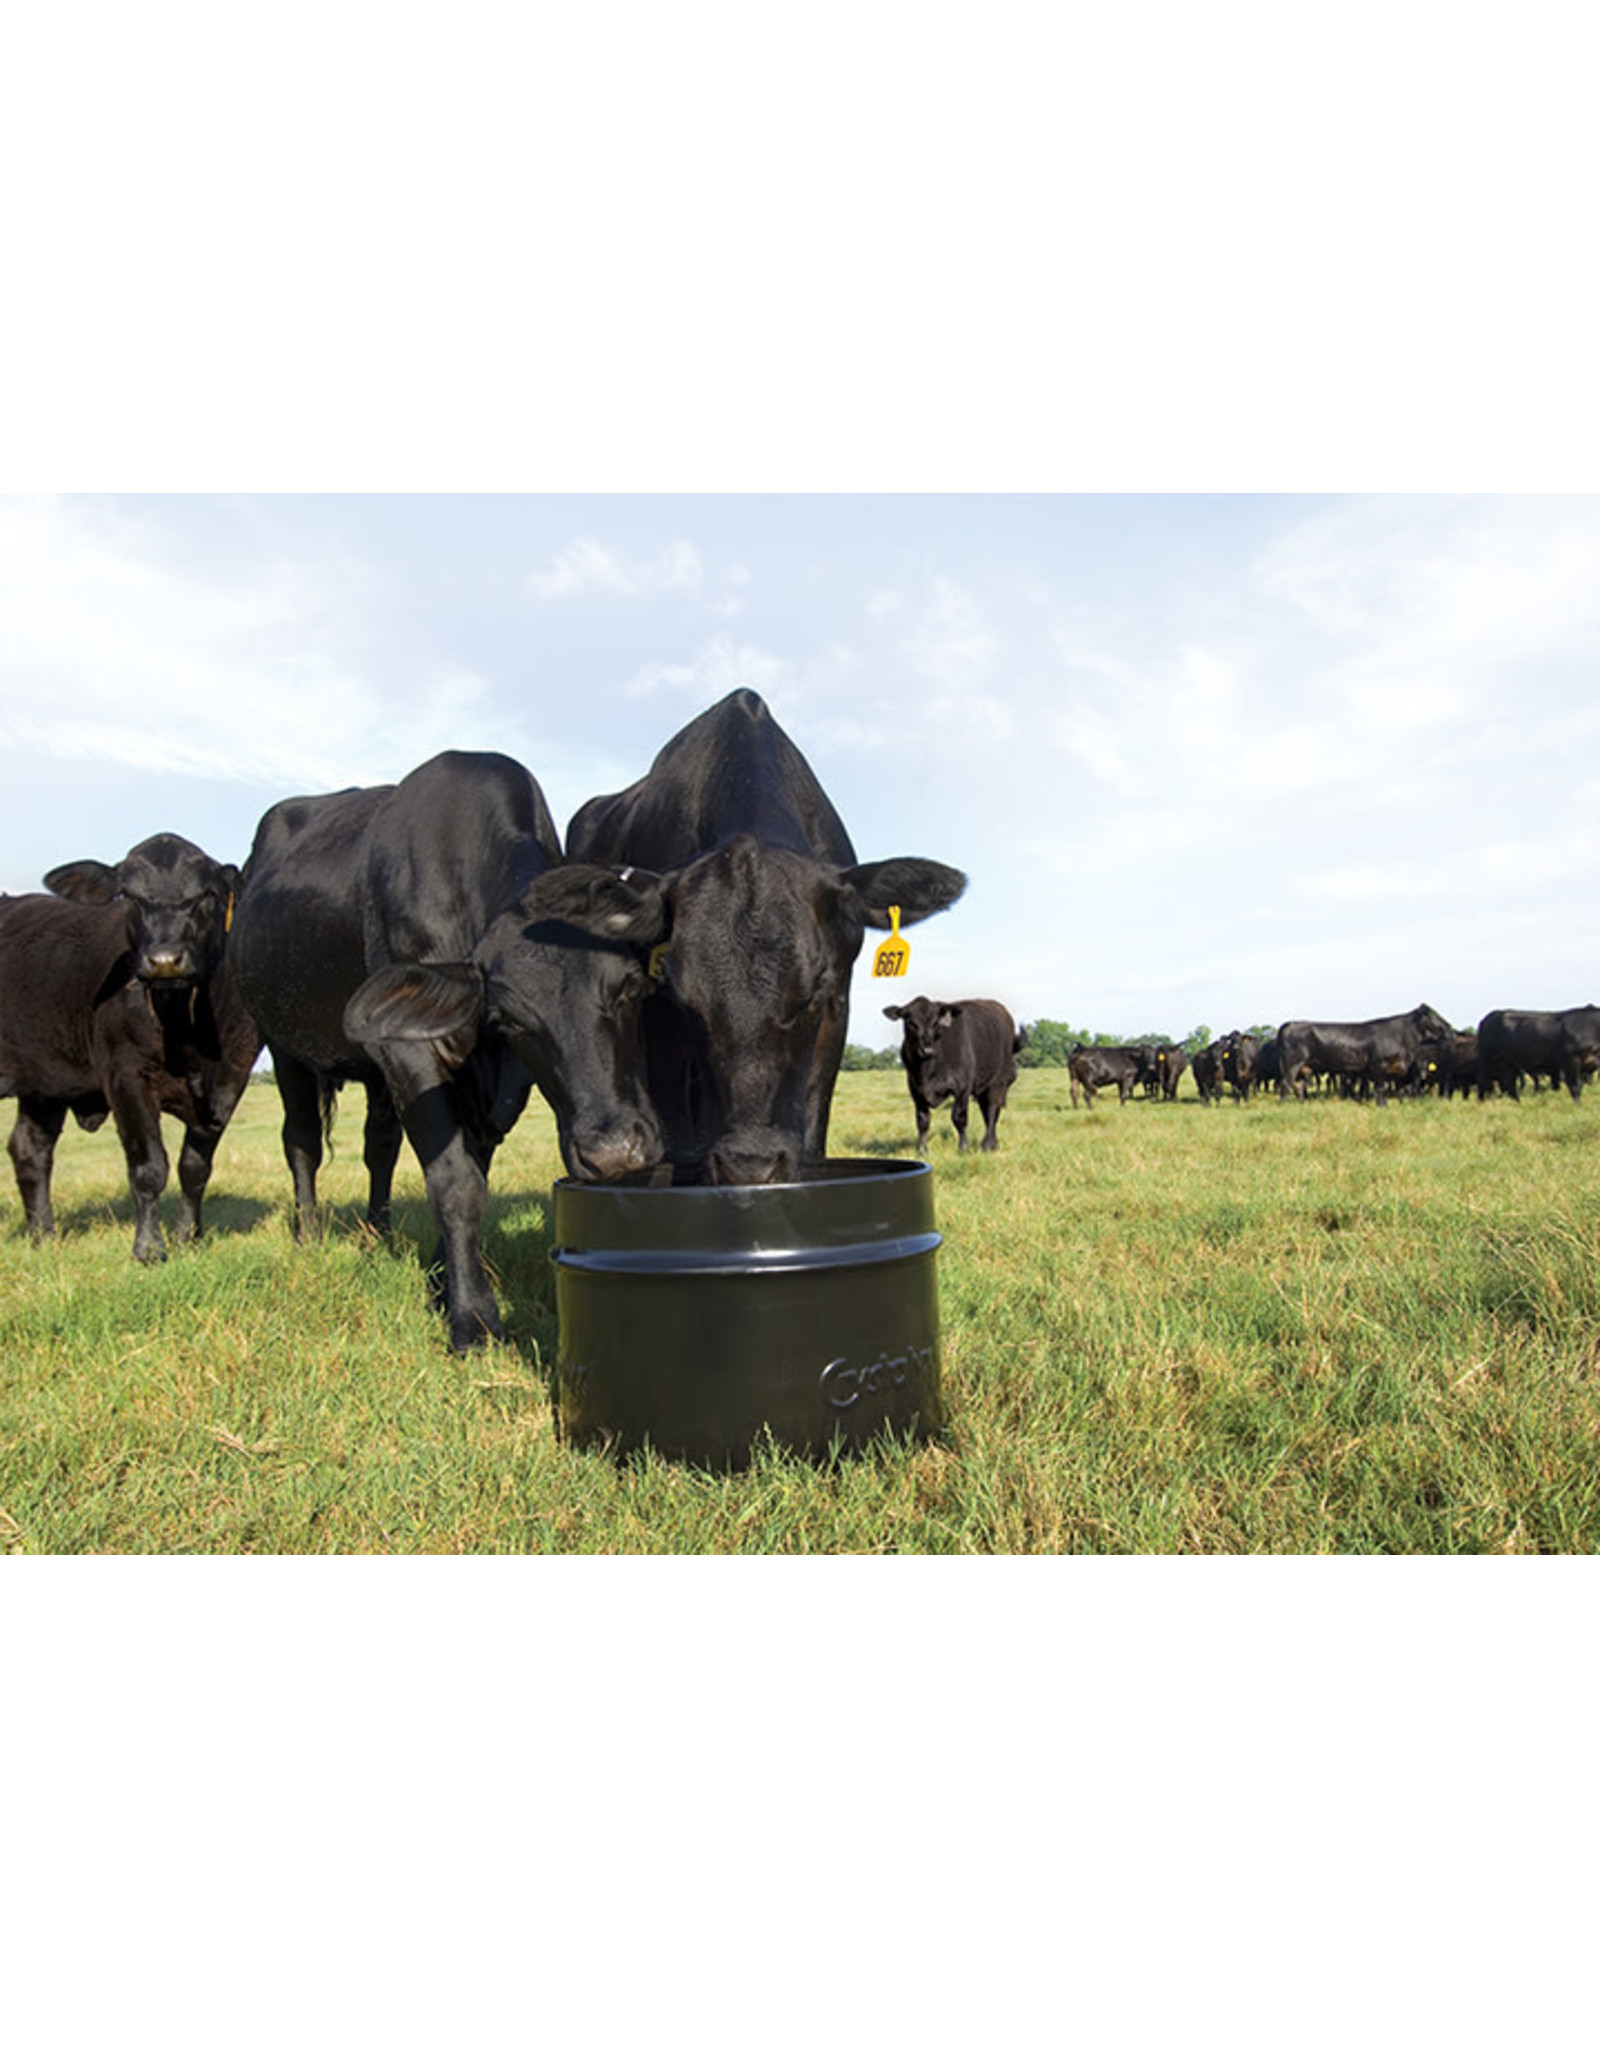 Crystalyx BLUEPRINT 6% Phos (BREED UP MAX)  - STEEL 250lbs - Specifically formulated with organic/chelated trace minerals and other micro ingredients to help beef cows re-breed in a timely manner, especially high demand breeding programs.